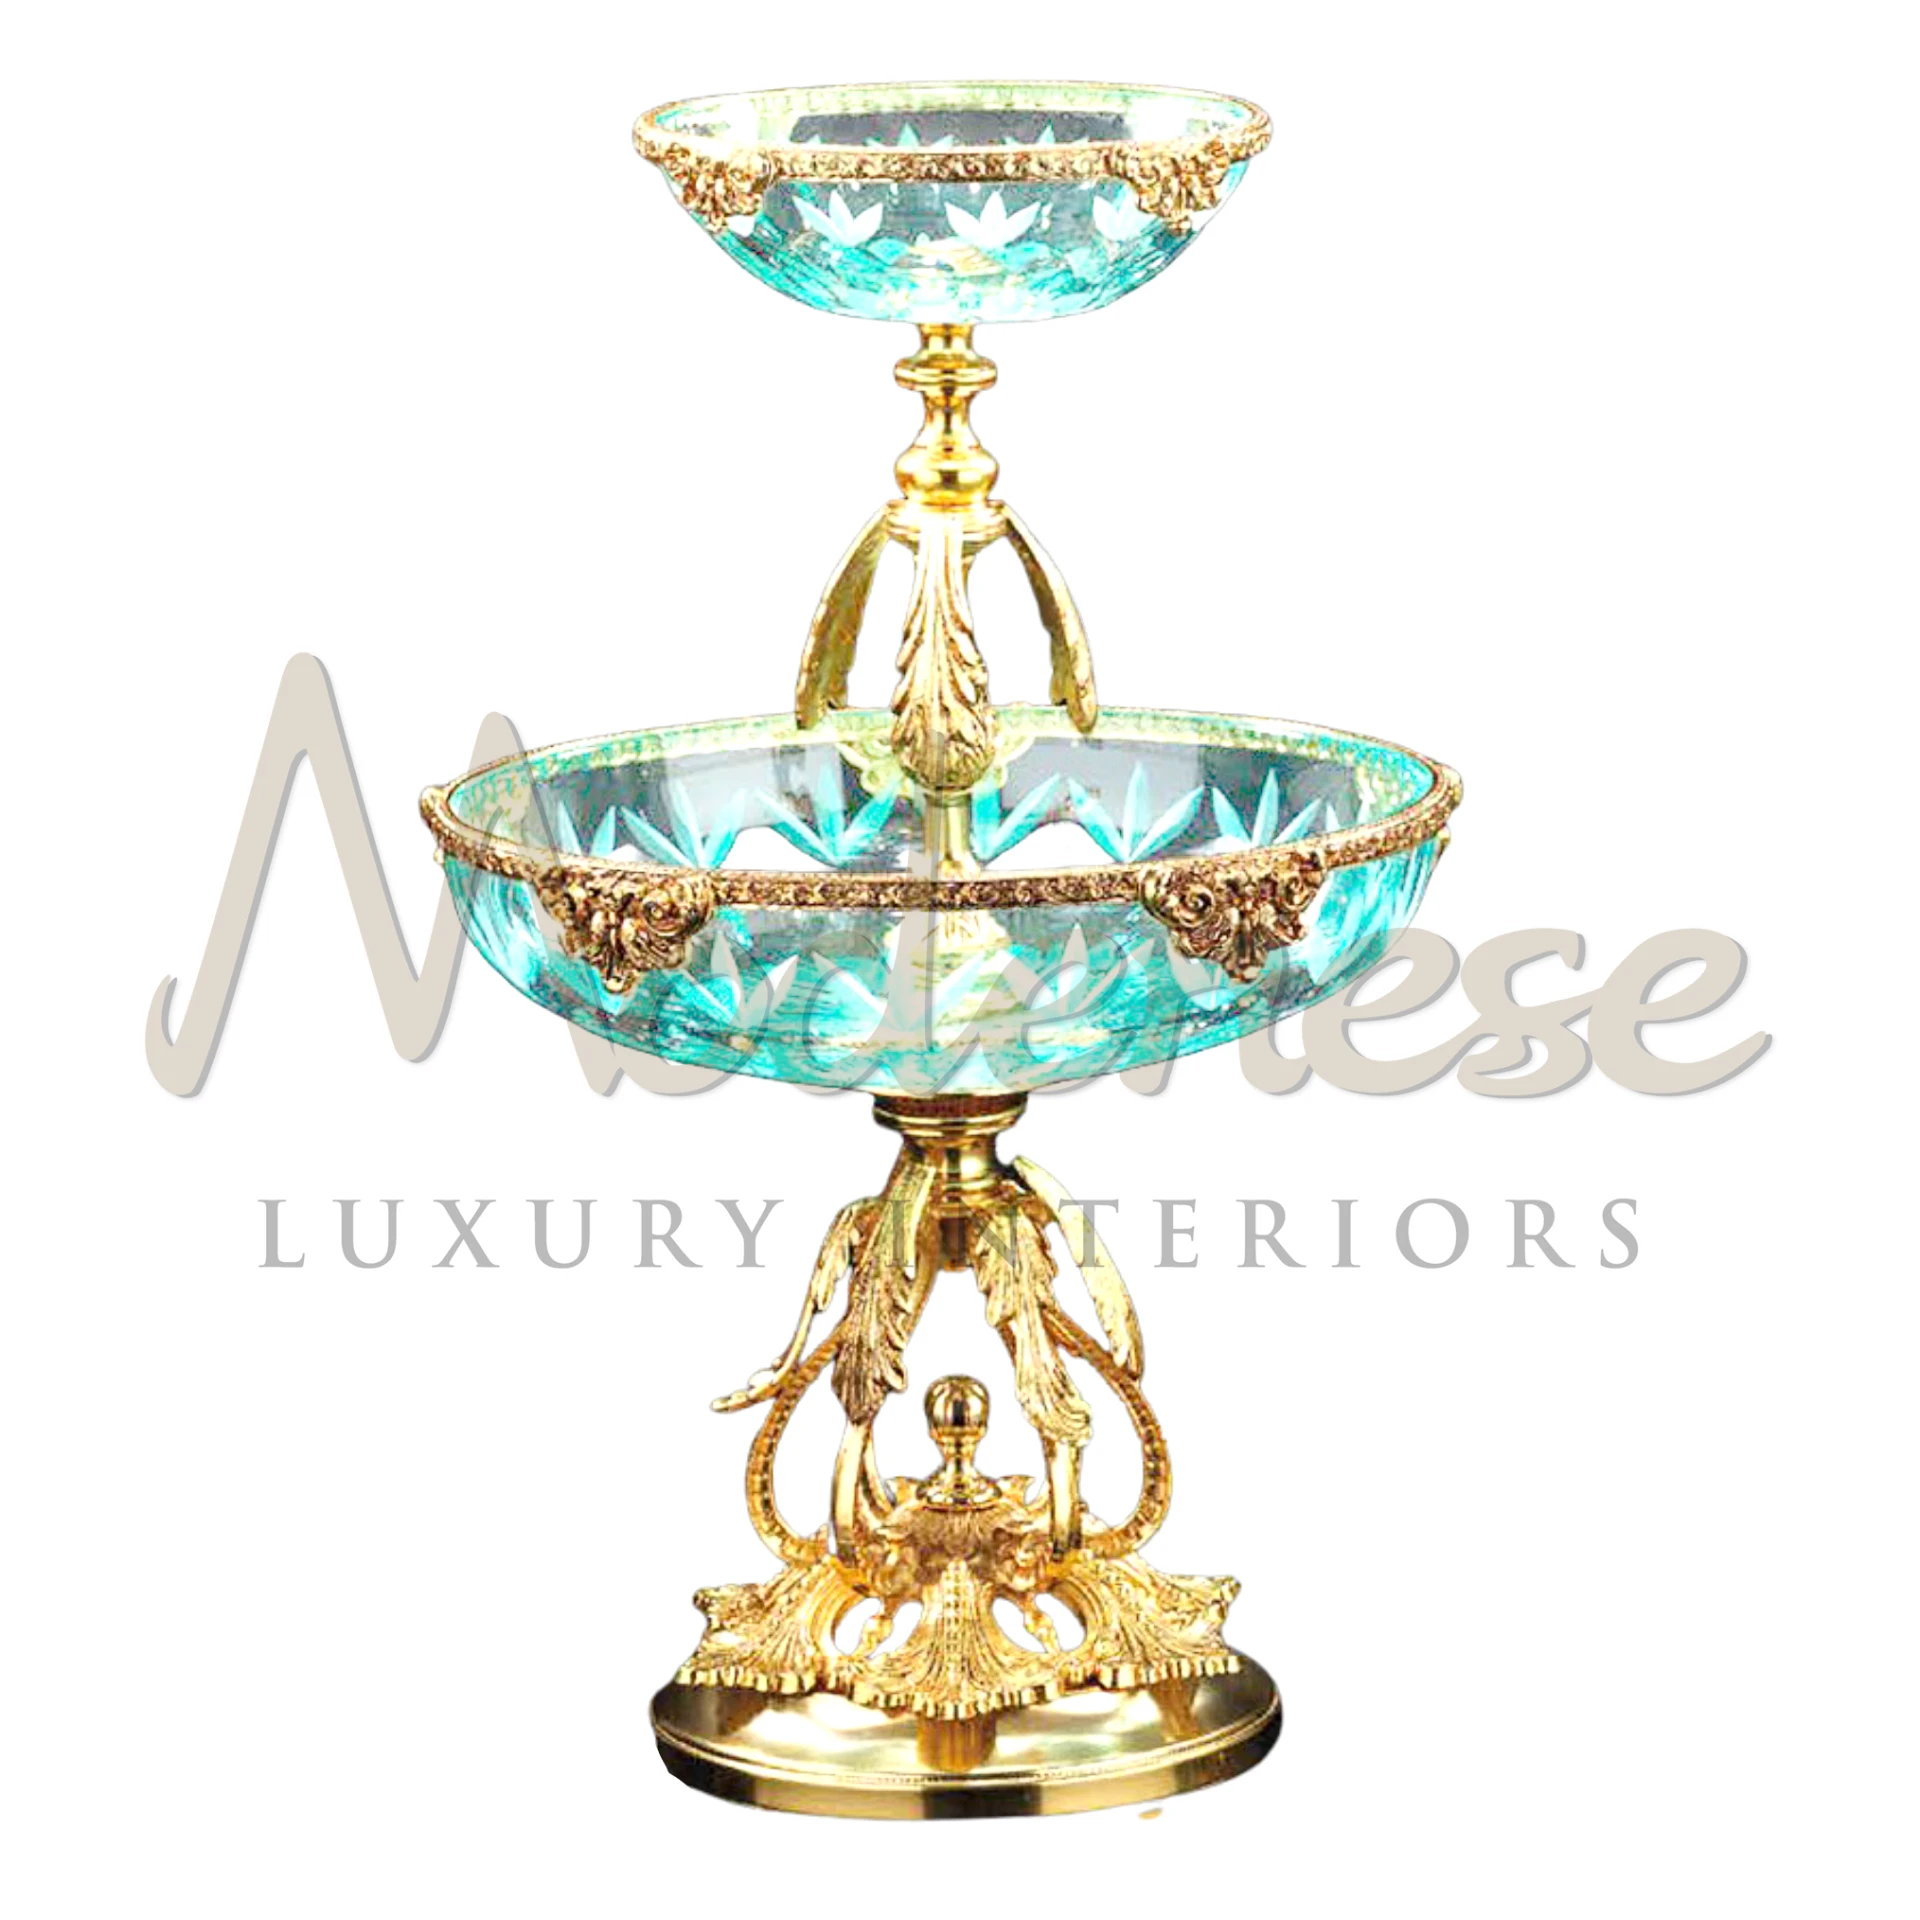 Stylish Turquoise Double Deck Bowl in fine materials, an exquisite decor choice for luxury interiors, blending classic and baroque styles in a unique vase design.







